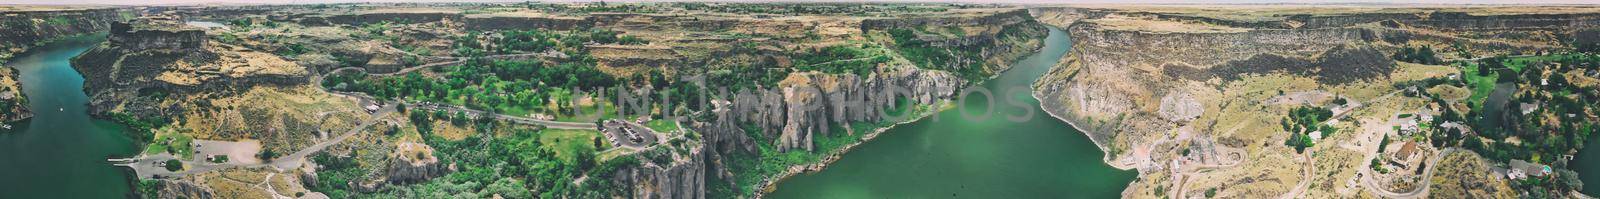 Aerial view of Shoshone Falls in summer season from drone viewpoint, Idaho, USA.